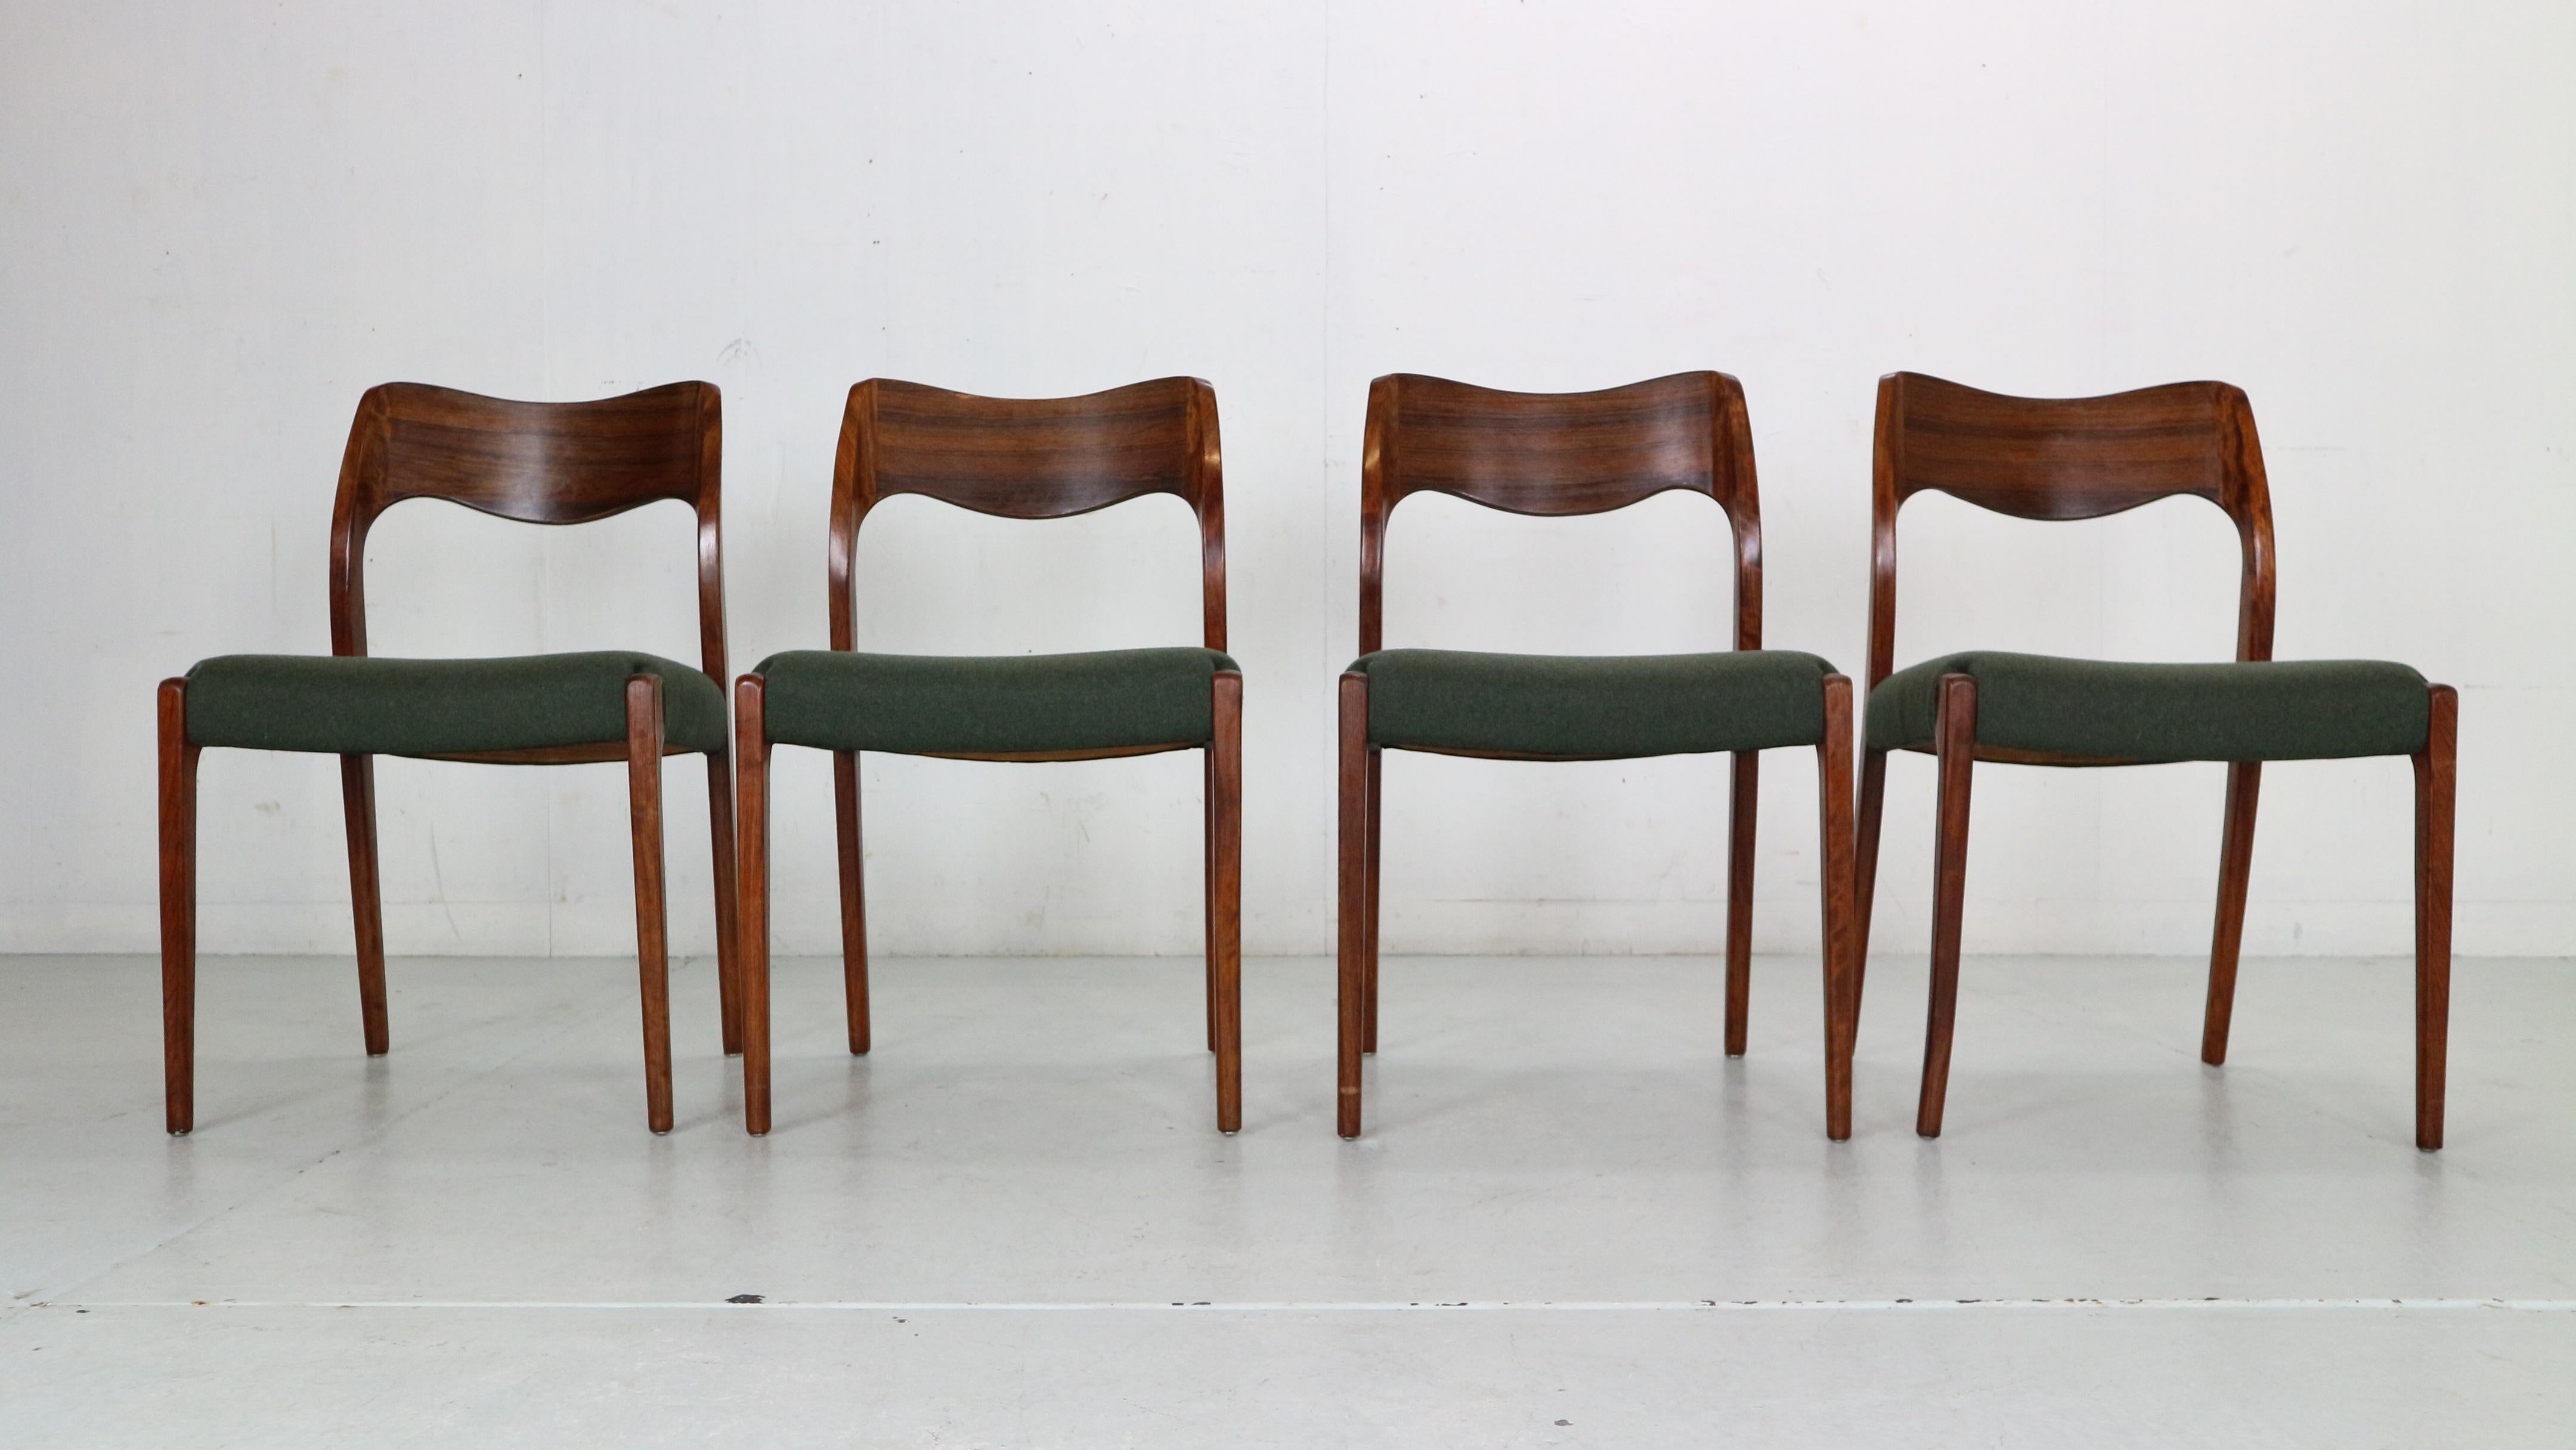 Set of 4 Danish Mid-Century Modern dining chairs by Niels Møller for J.L. Moller. 
Model number- 71.
Perfectly executed joinery connects the solid rosewood backrest to the rear legs and creates an expressive, sculptural form. The deep curve in the